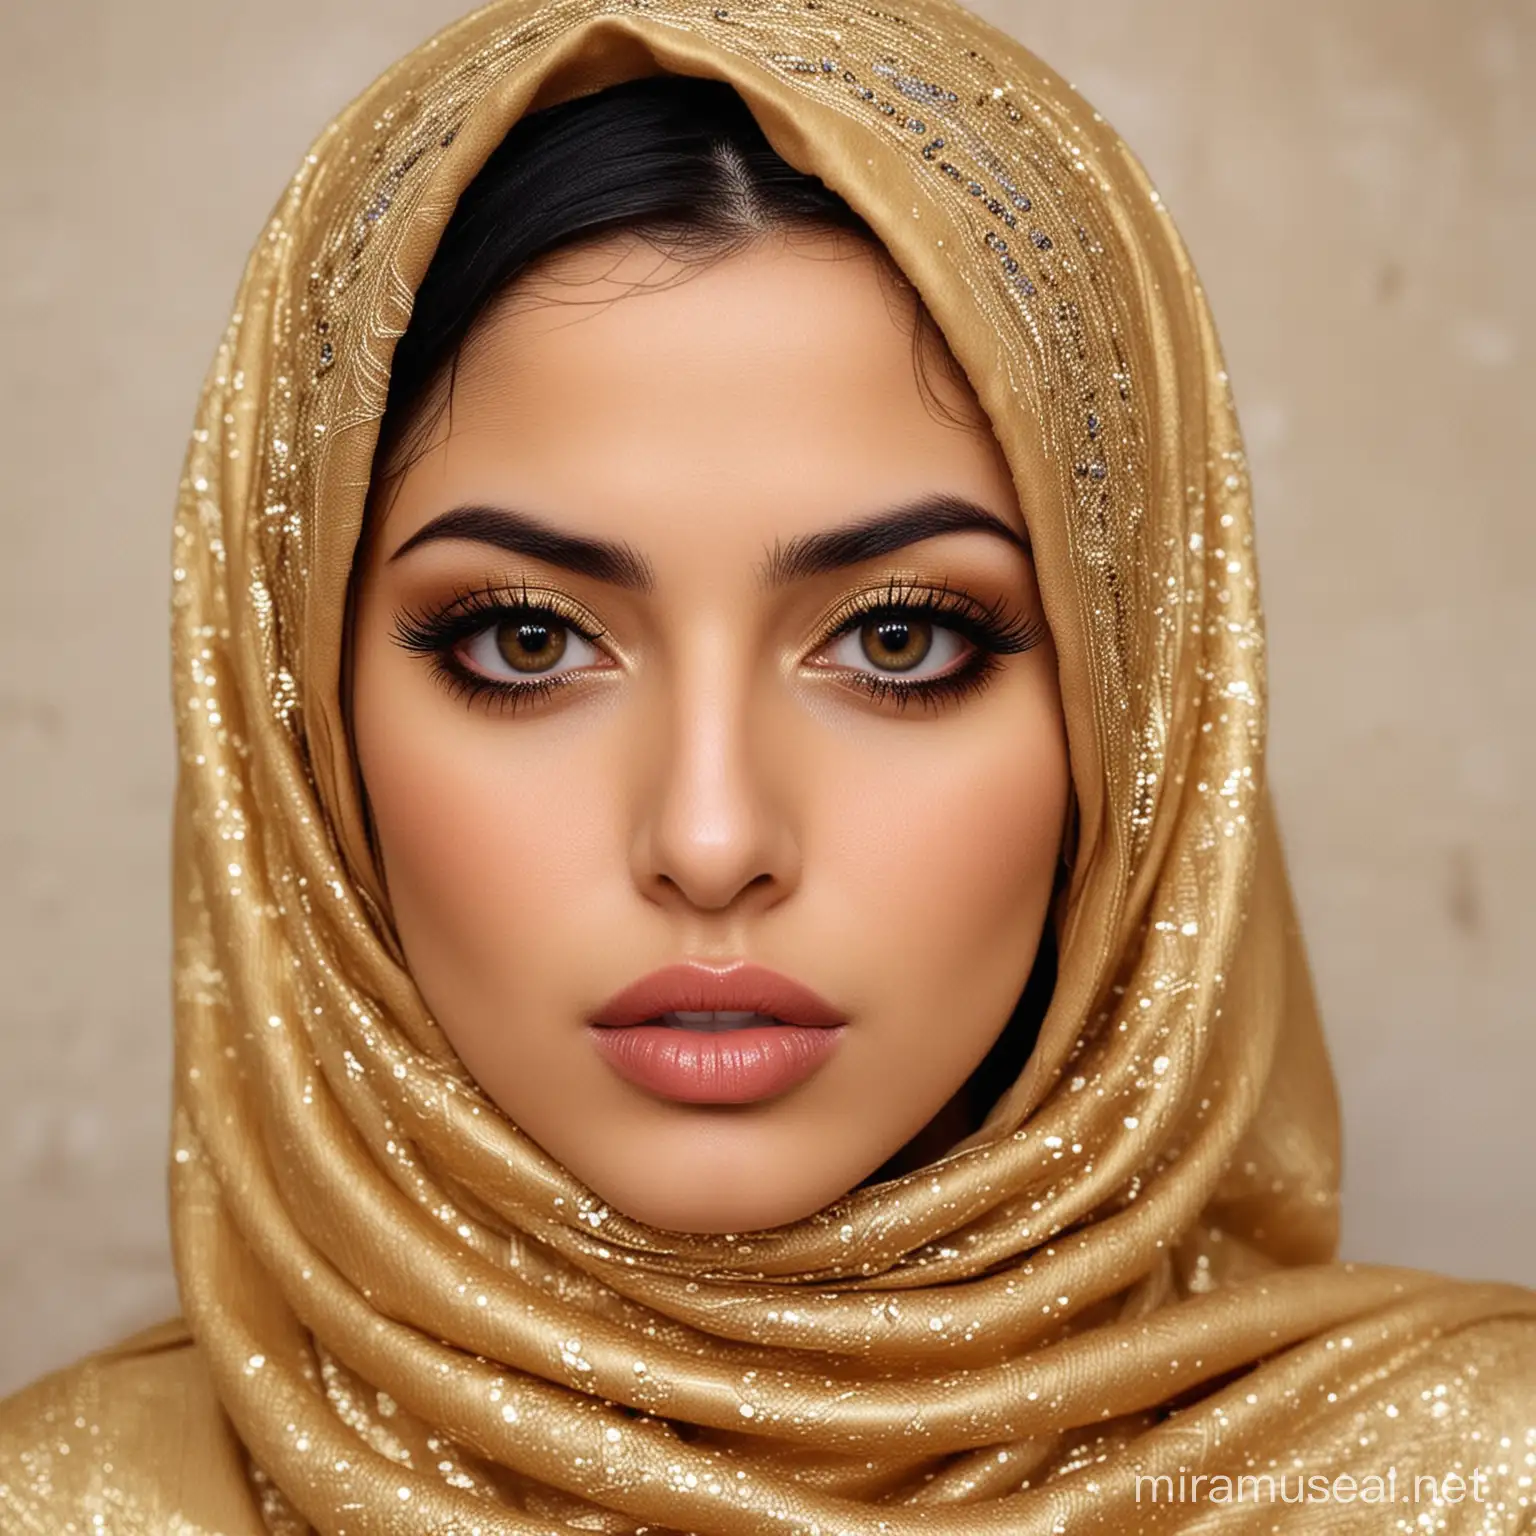 Iranian Girl in Elegant Gold Hijab with Striking Features